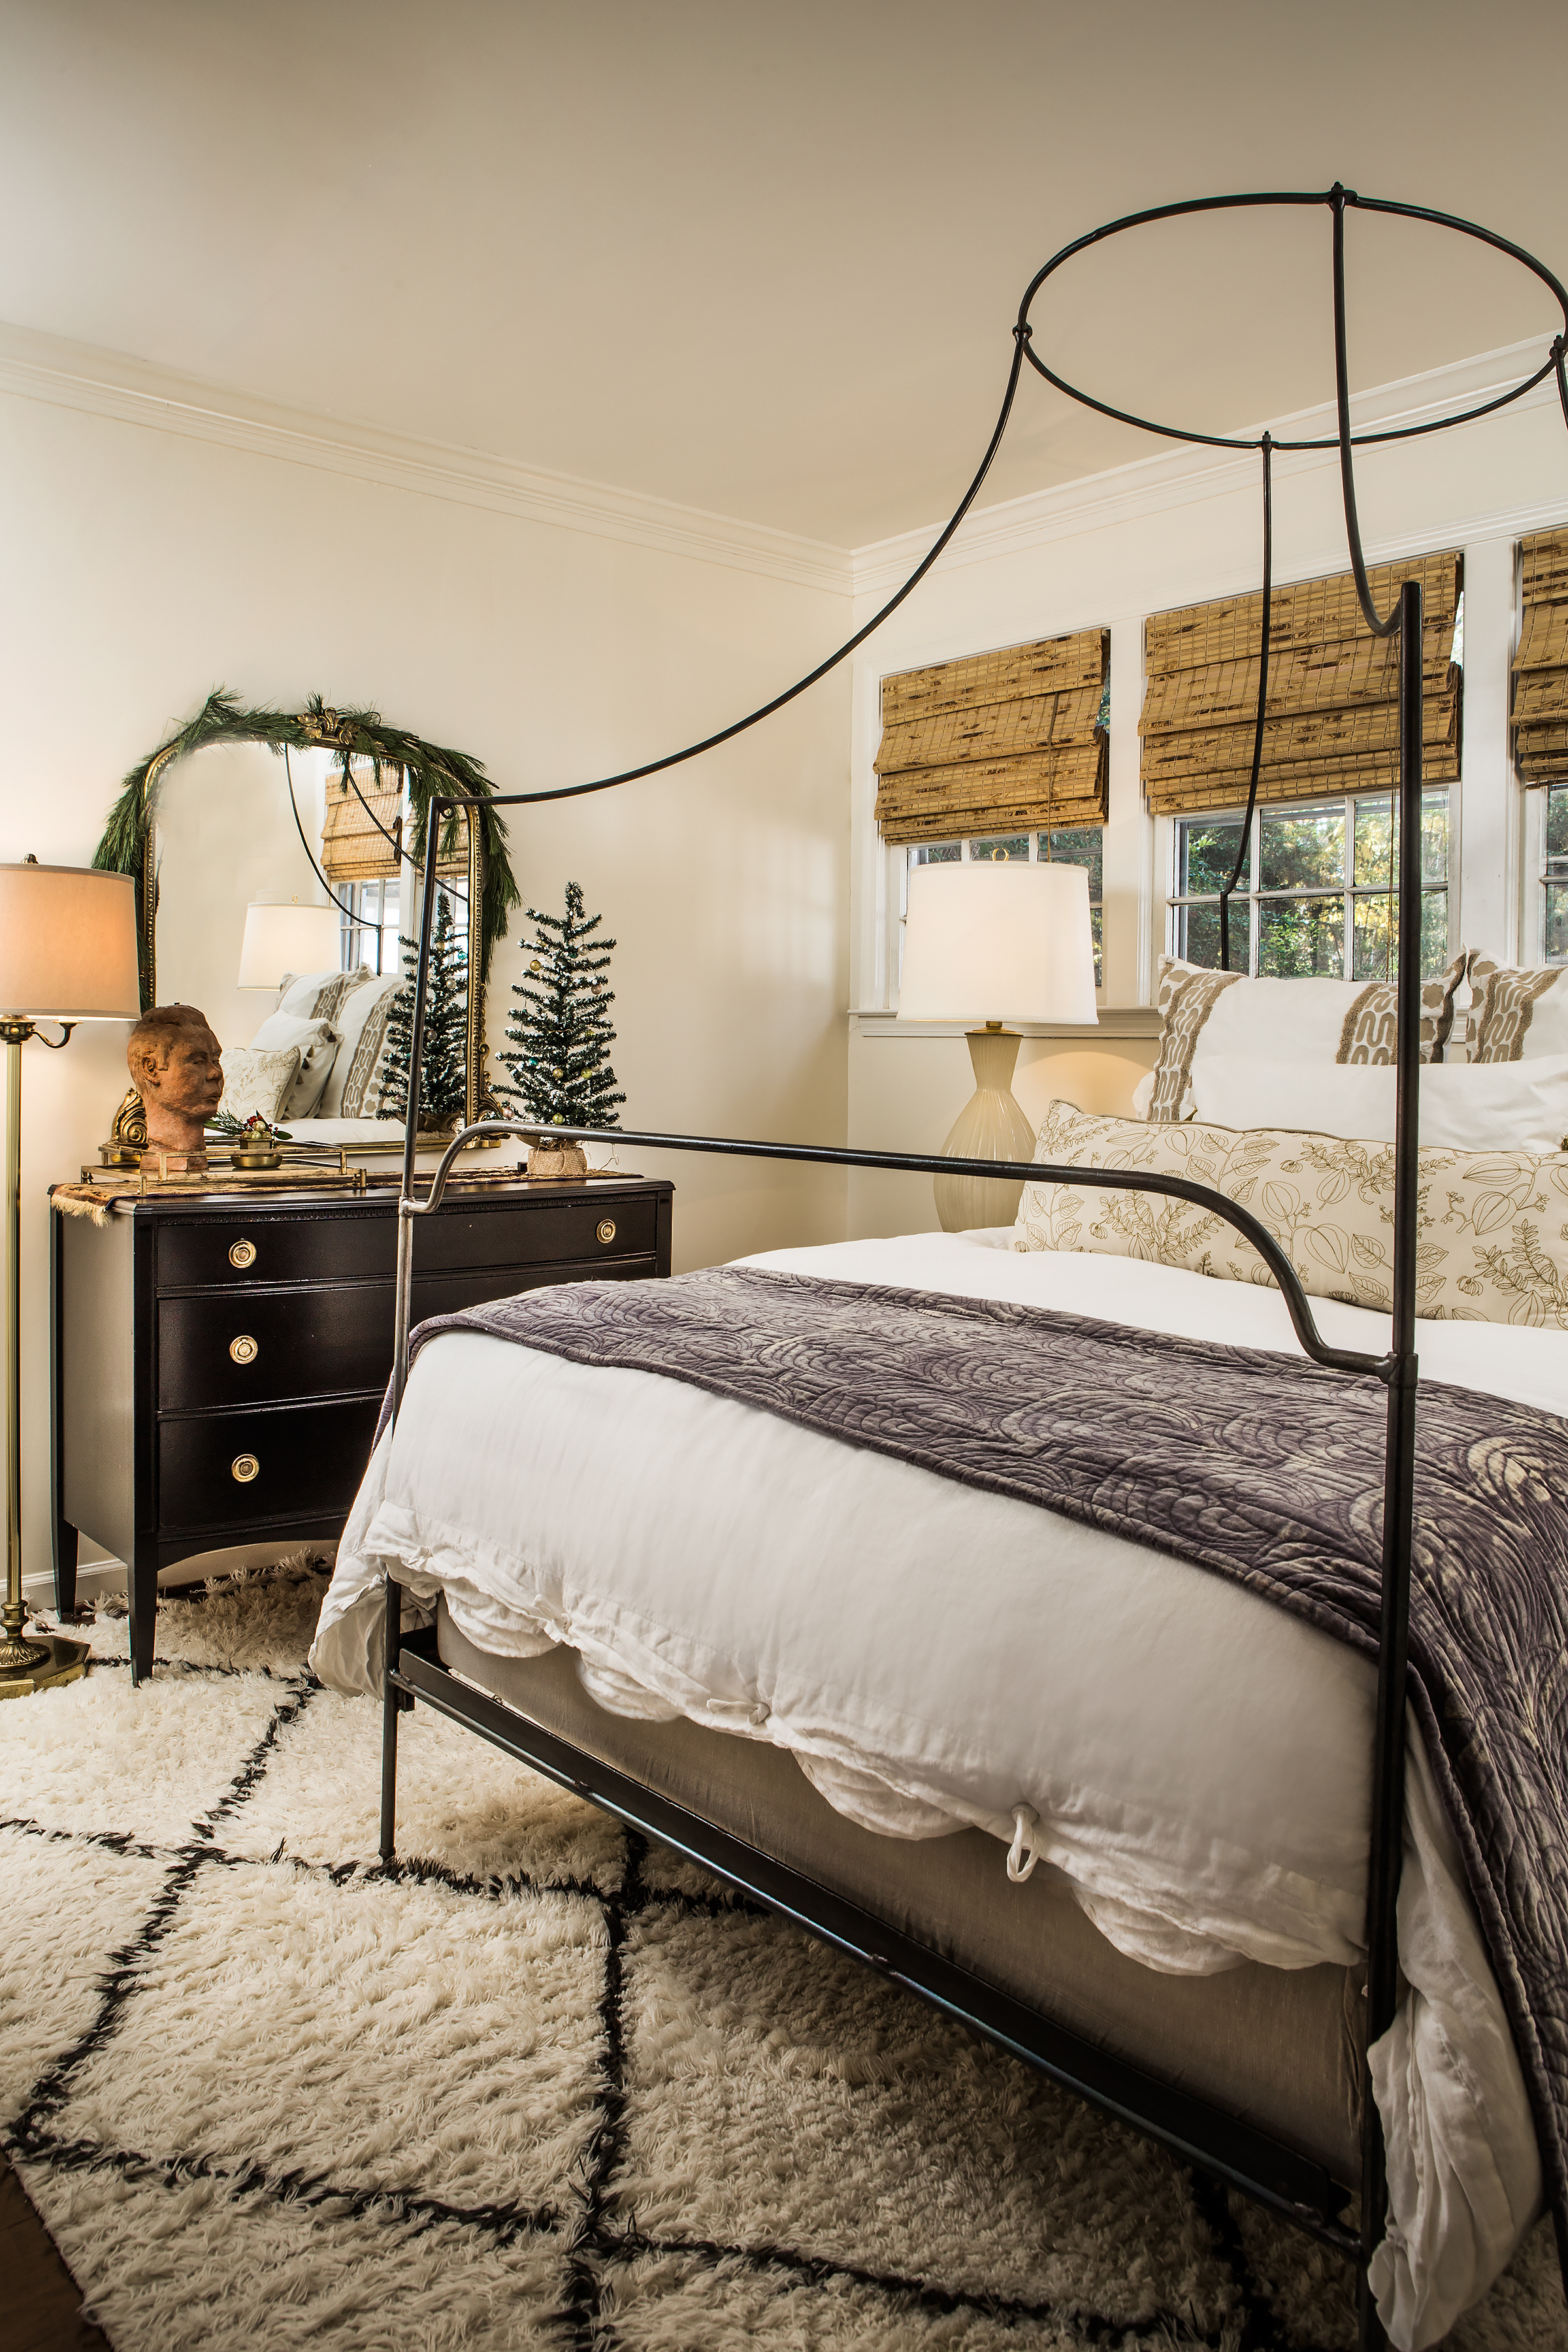 The focal point of the couple’s master suite is an Anthropologie bed with a contemporary canopy and custom pillows. Simple fresh greens accent the tasteful, understated space.